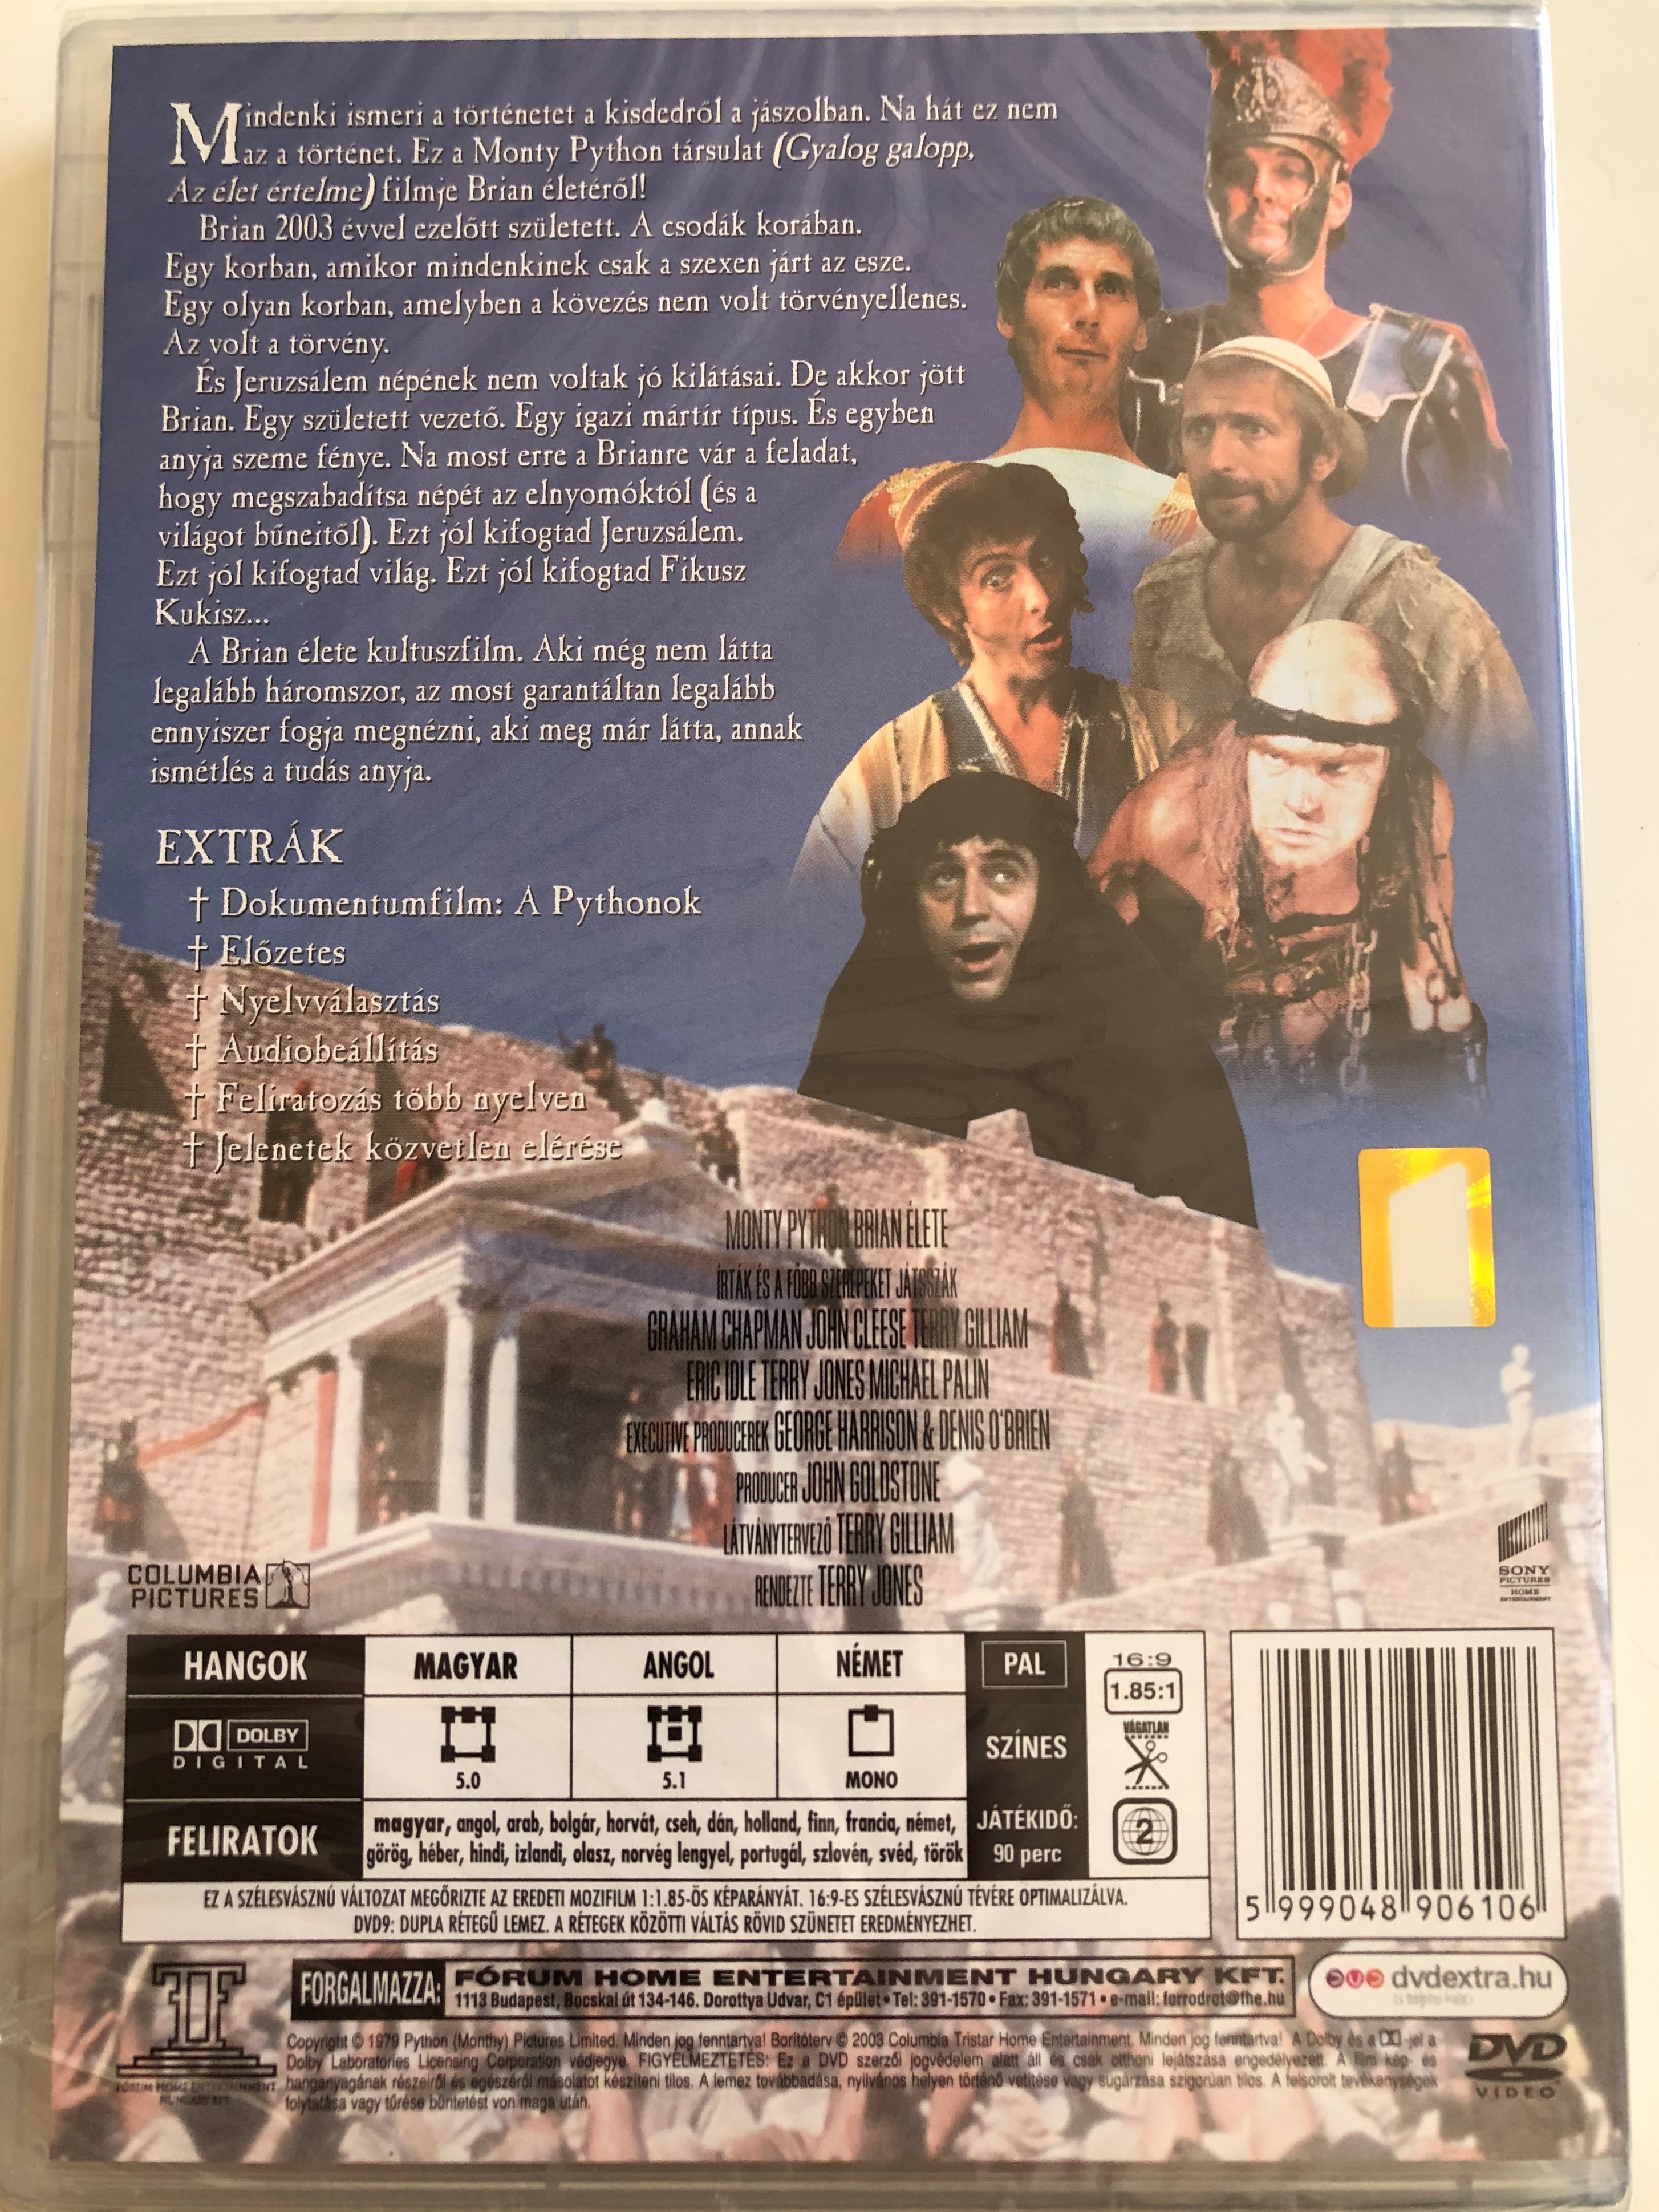 monty-python-s-life-of-brian-dvd-1979-brian-lete-directed-by-terry-jones-2.jpg